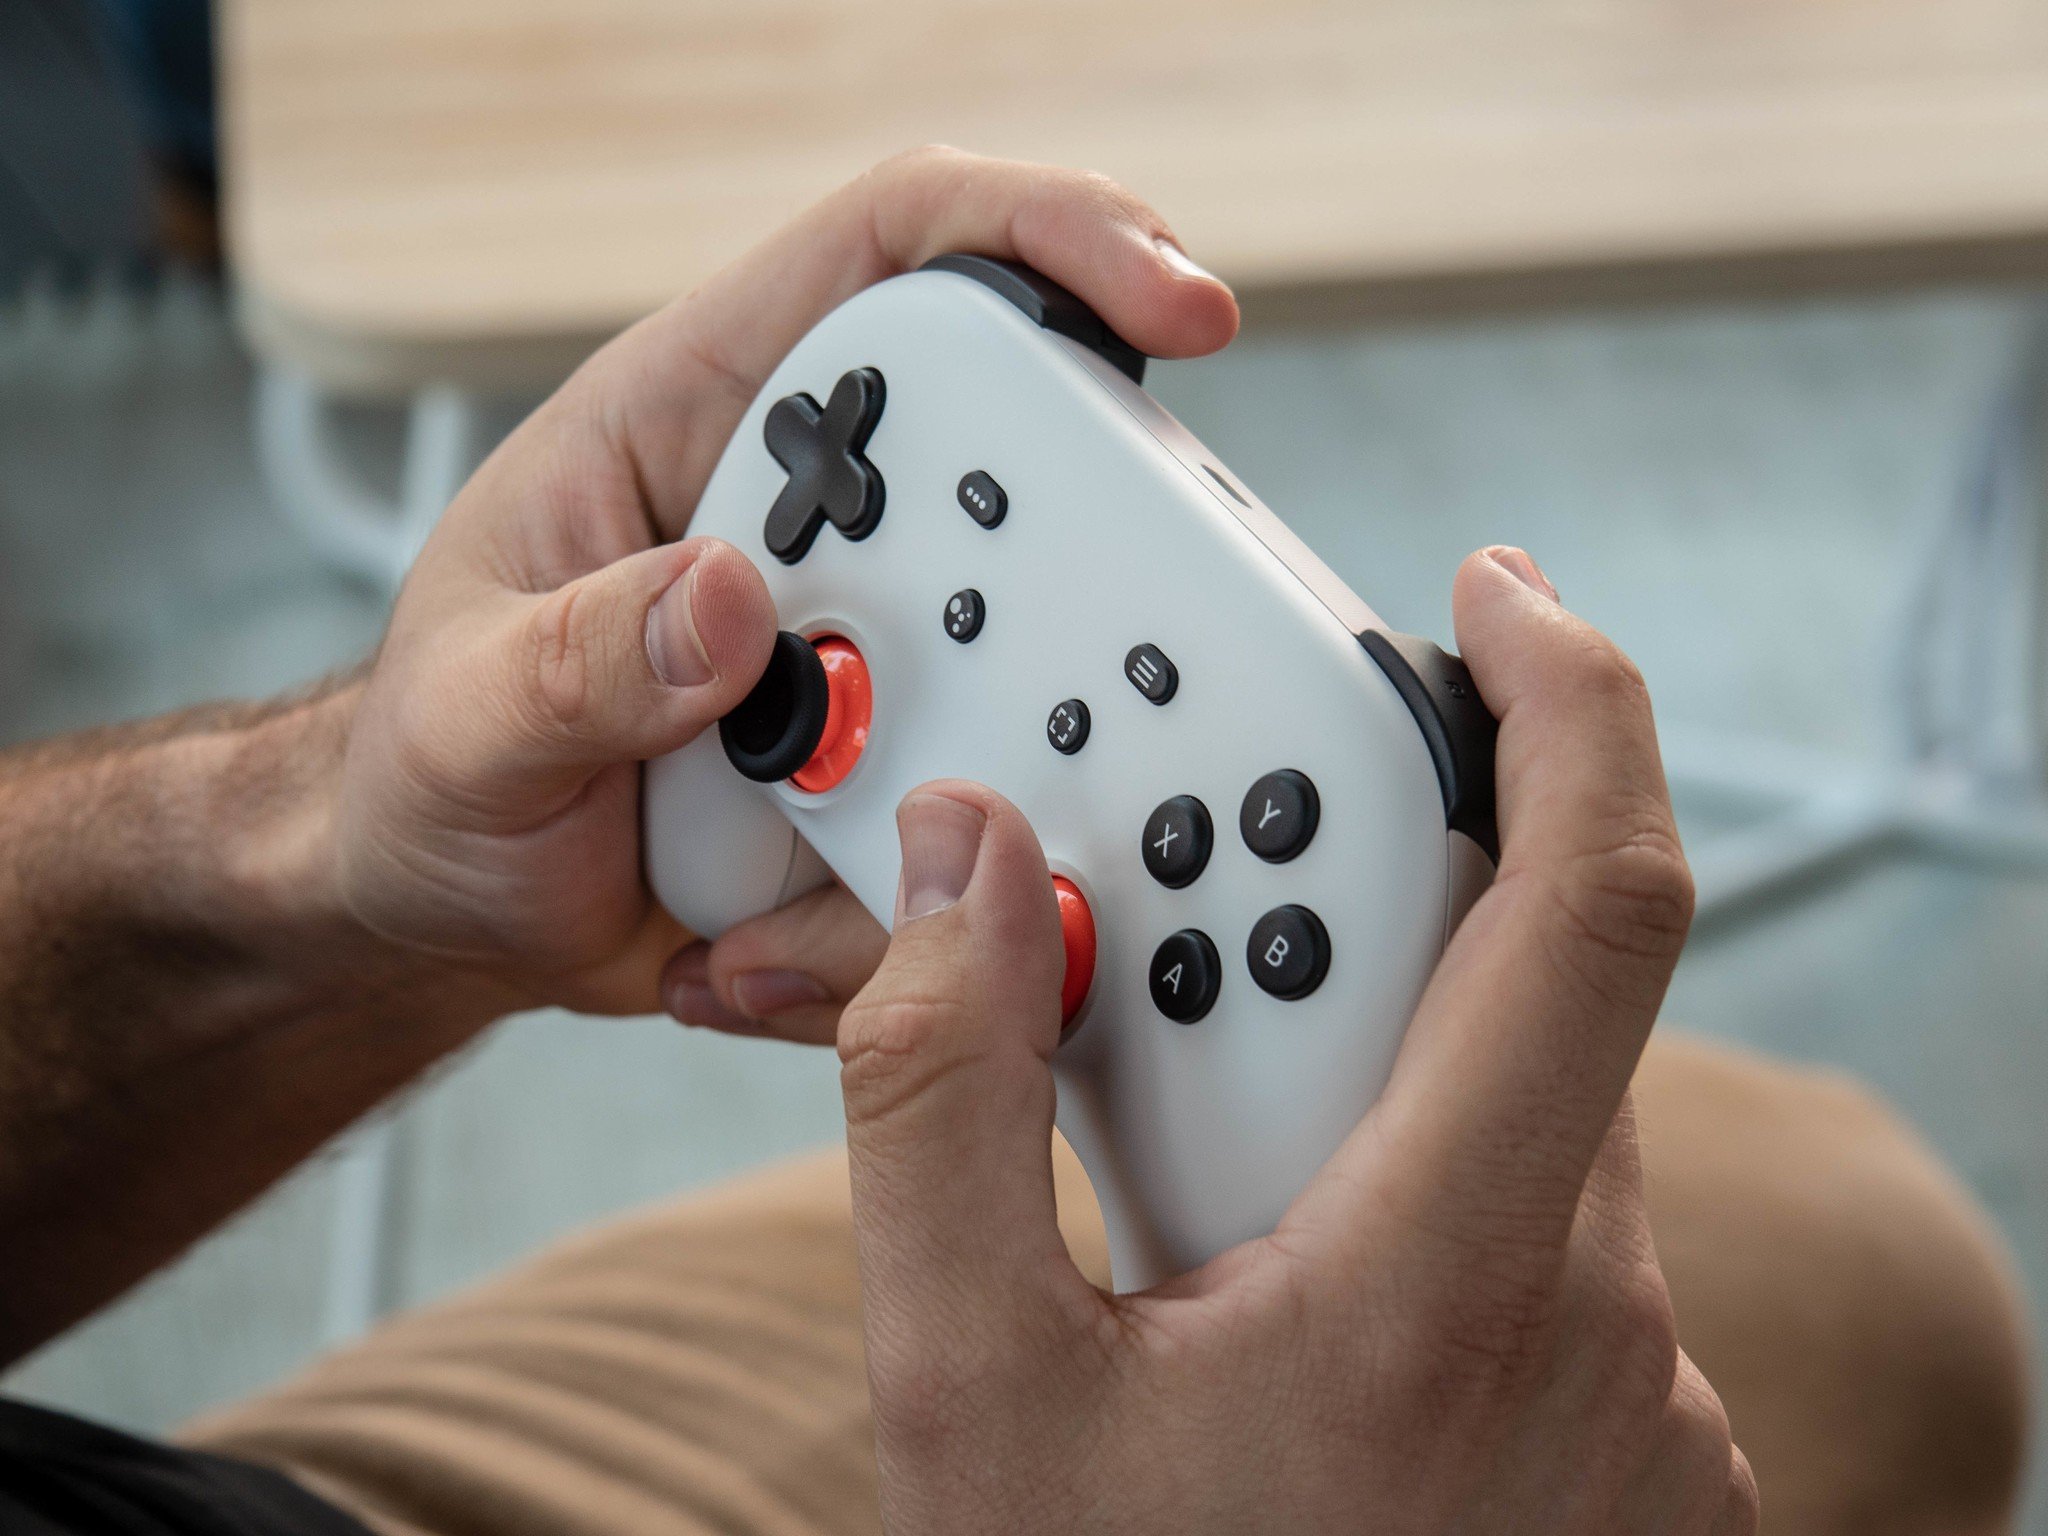 Google claims Stadia could overcome latency by predicting user inputs